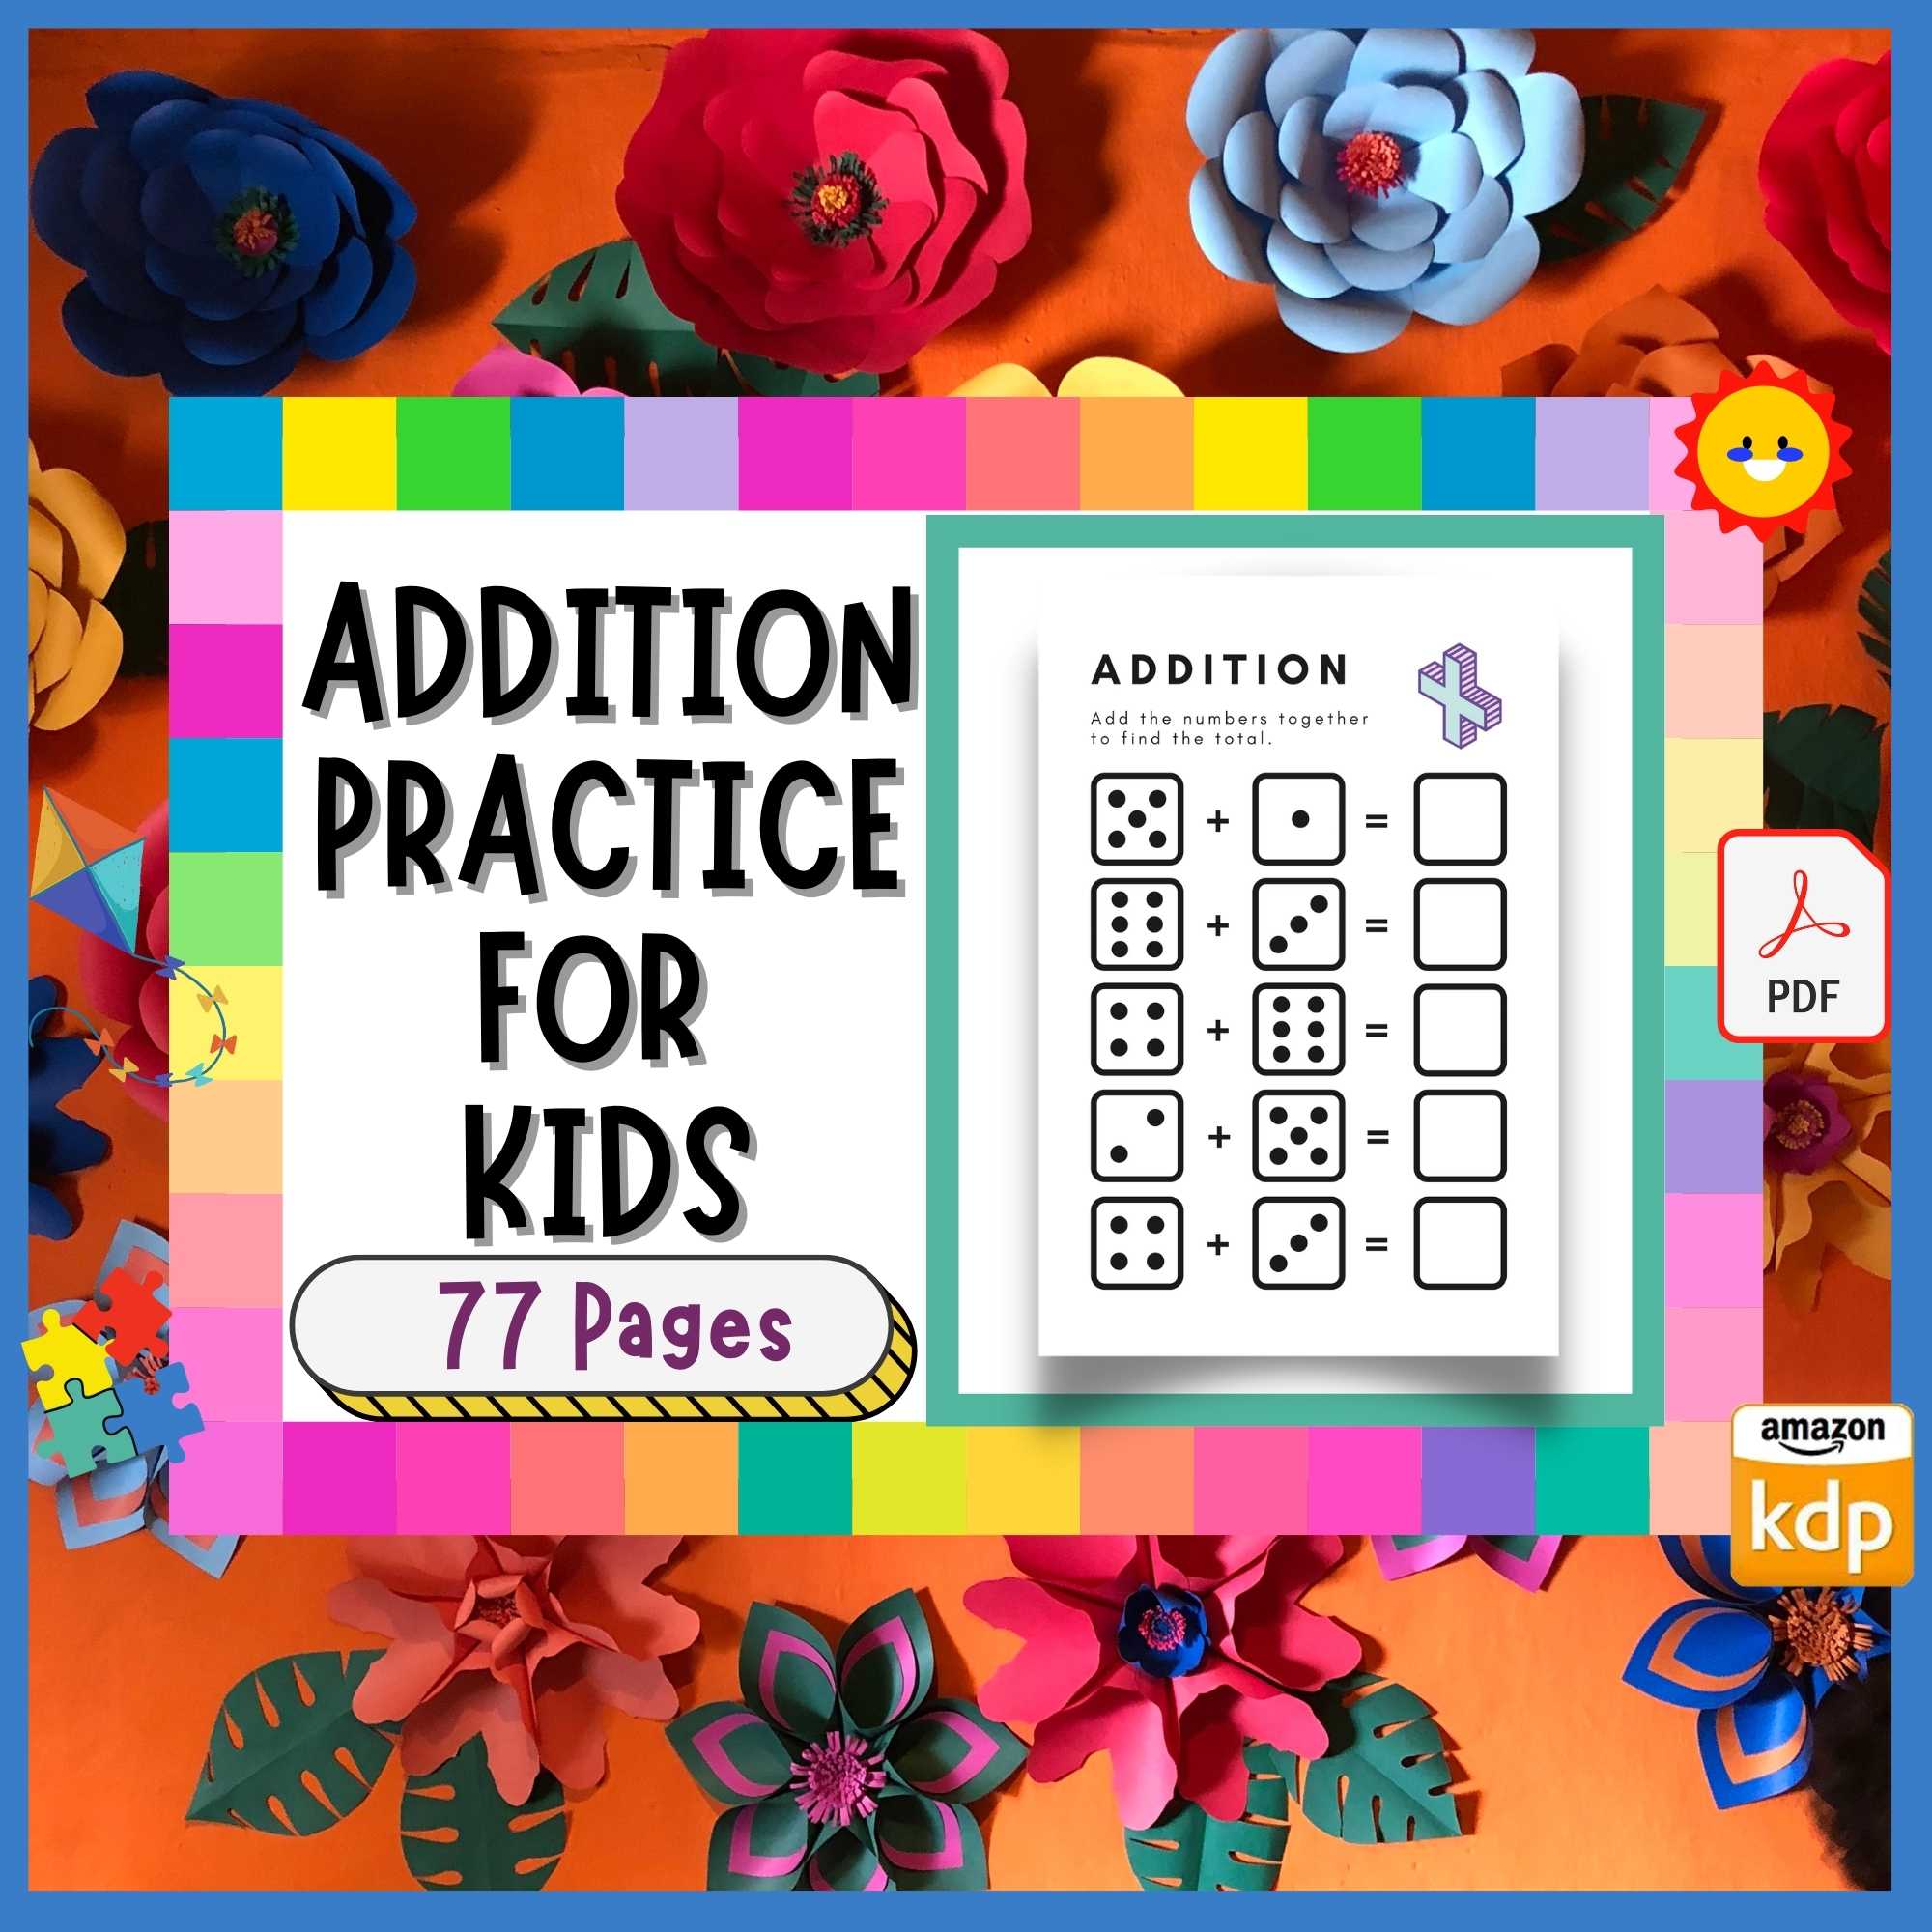 Kids Math Bundle With Addition Practice Pages cover image.